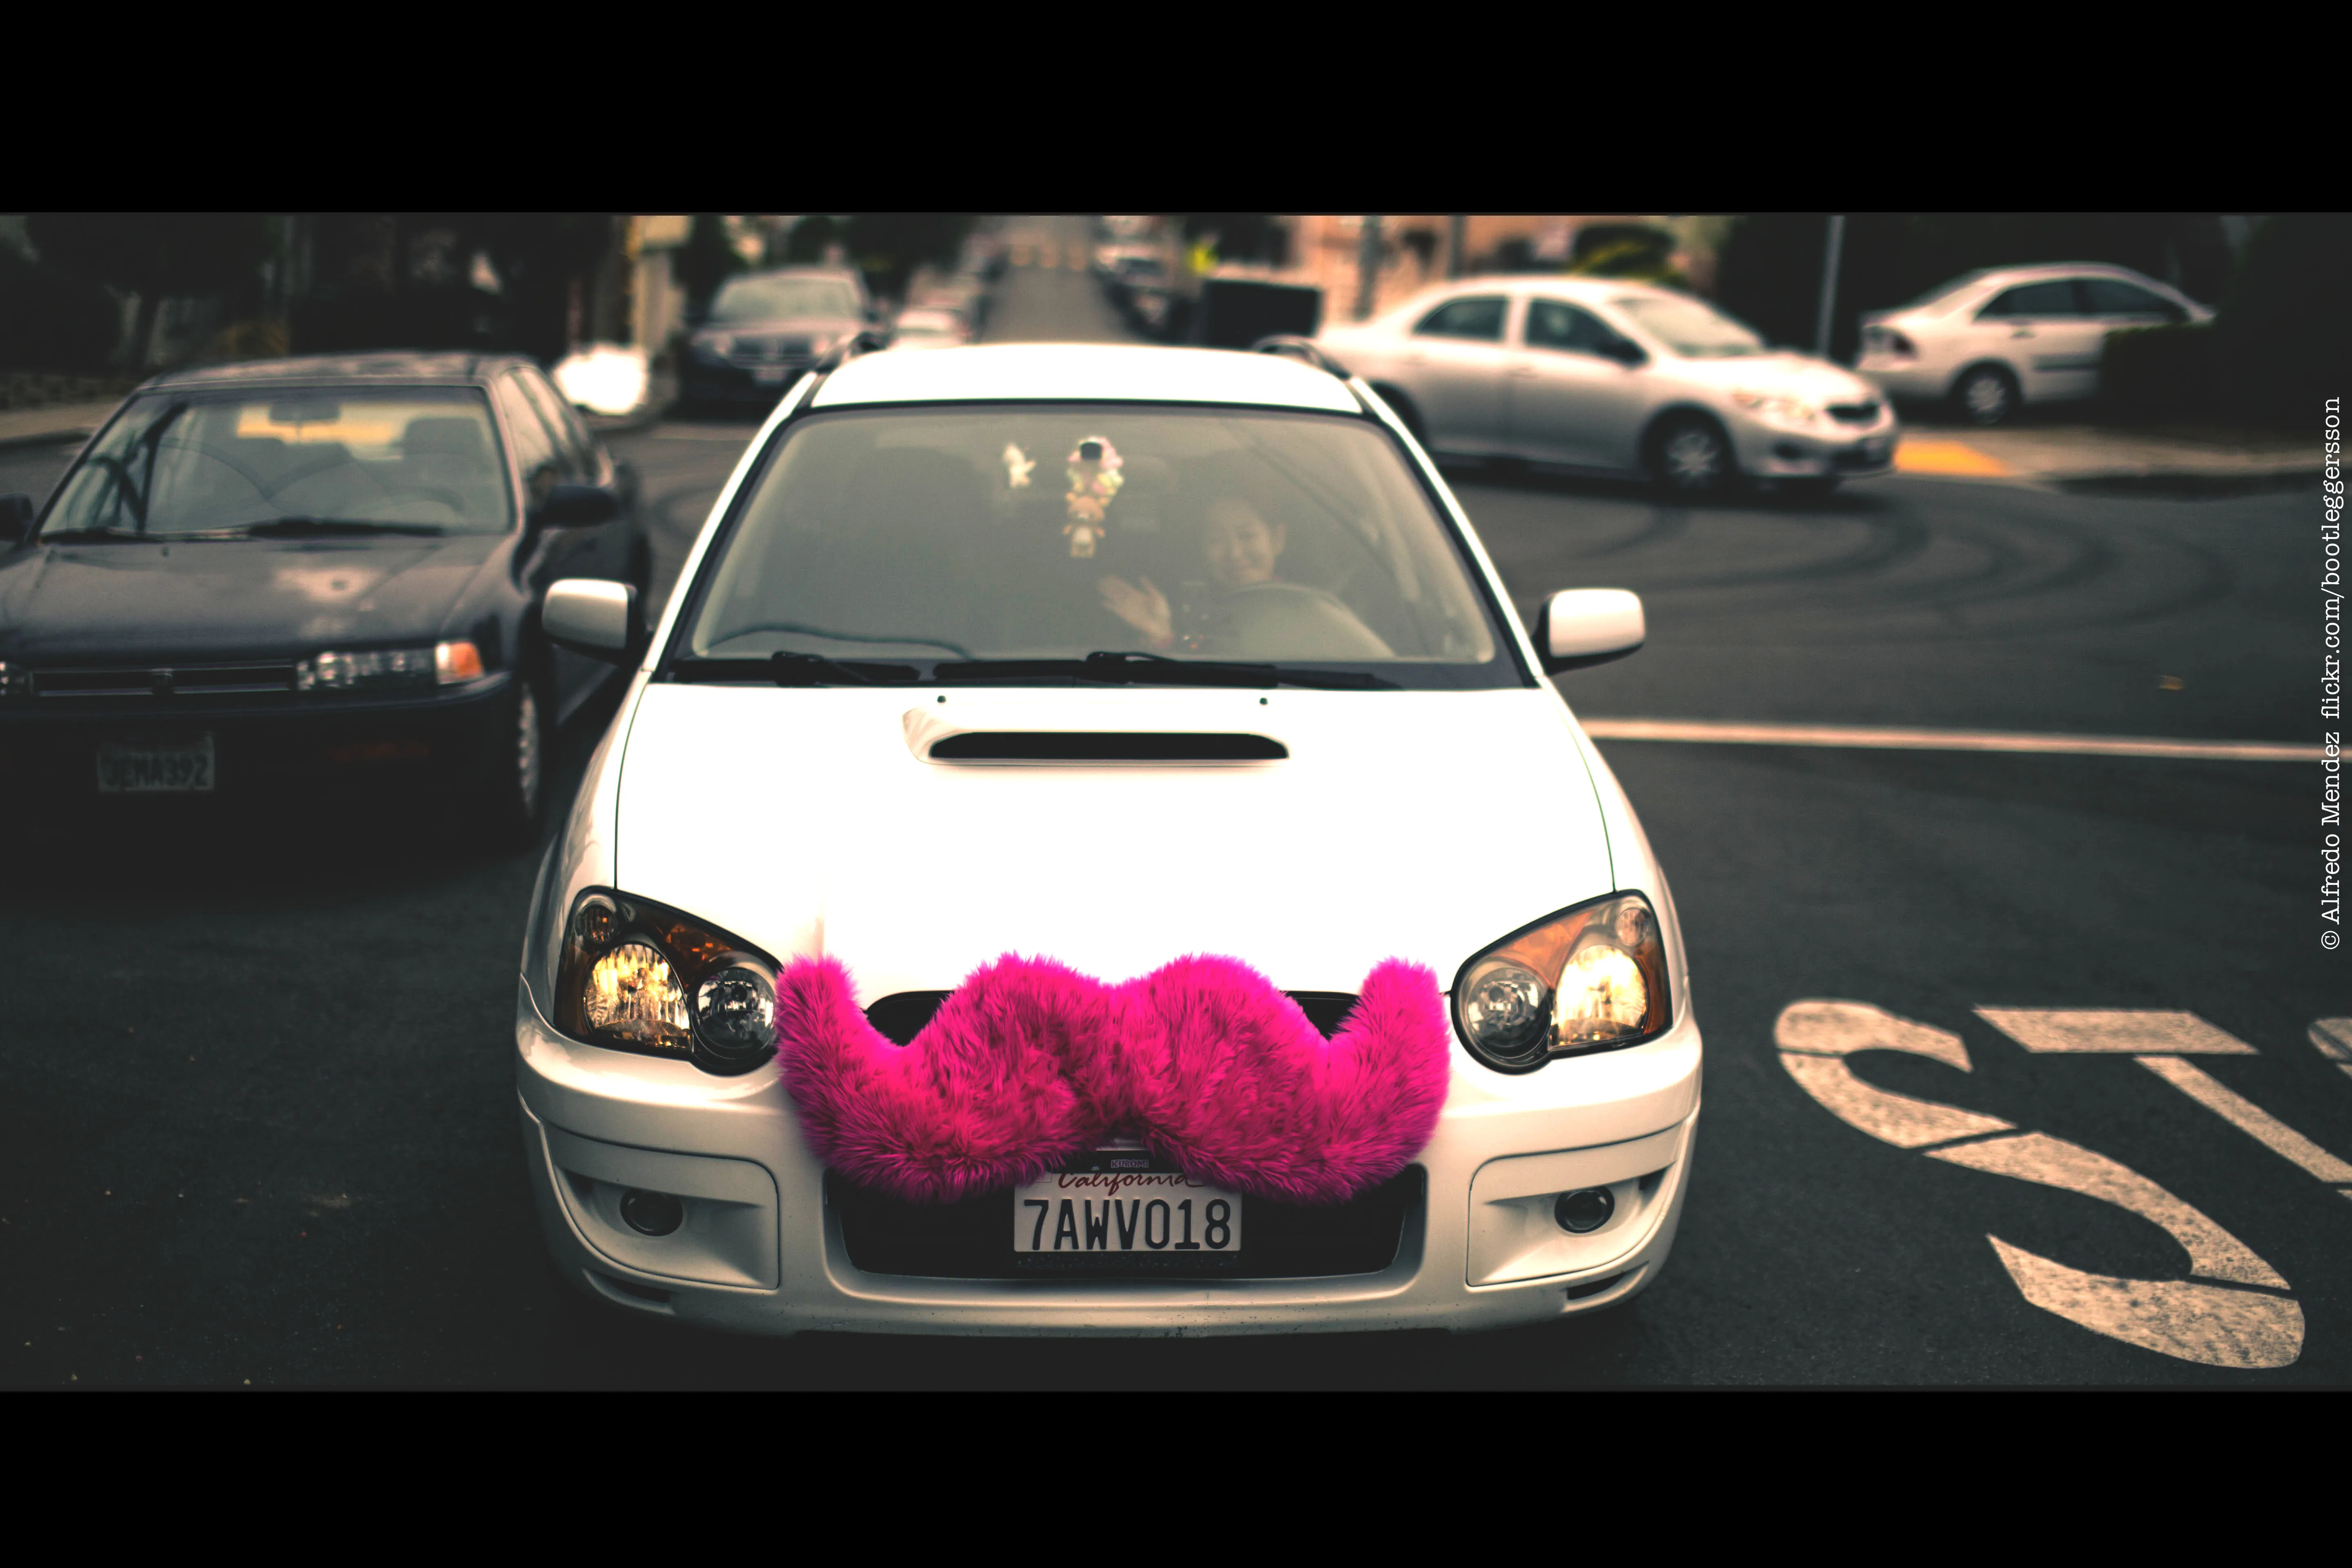 A photograph shows a car with a large, fuzzy, pink moustache attached to the front grill of the car.